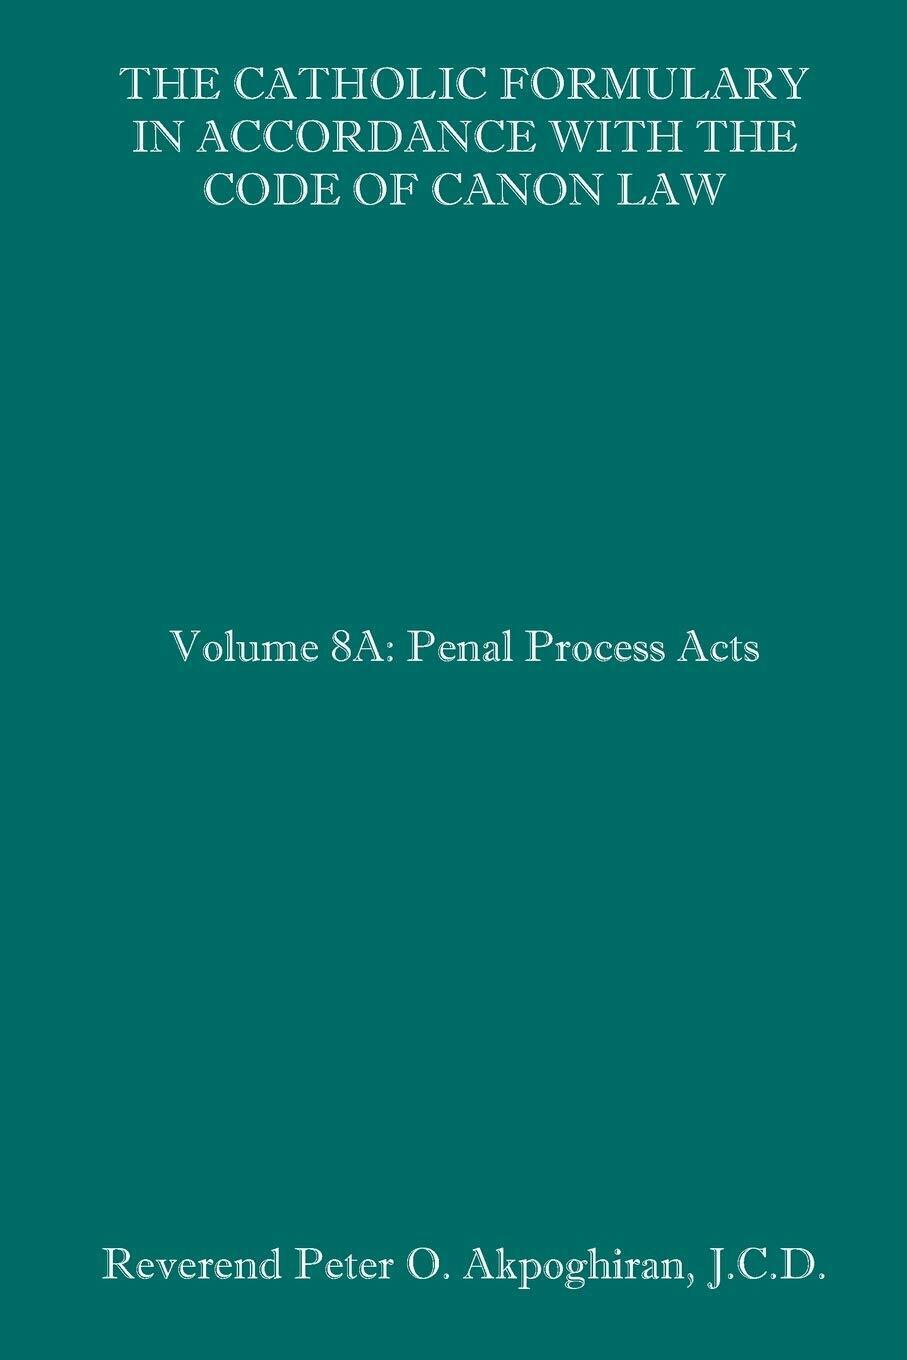 The Catholic Formulary in Accordance with the Code of Canon Law Volume 8A: Penal